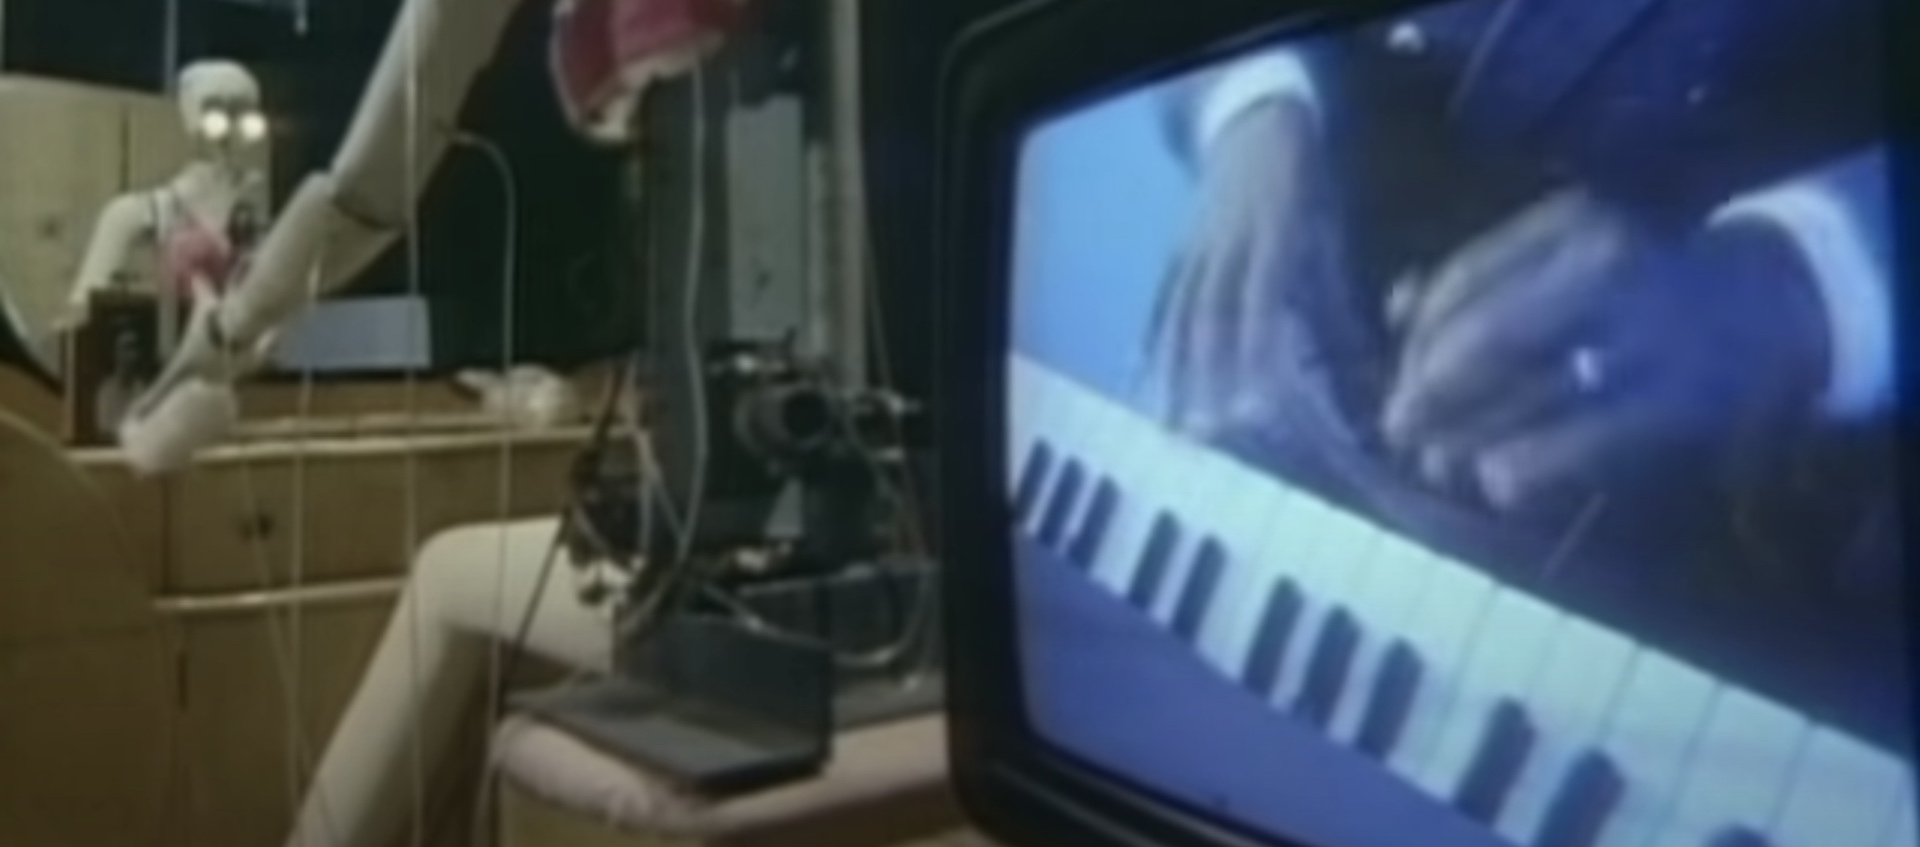 Still from Godley & Creme's music video for Herbie Hancock's "Rockit"